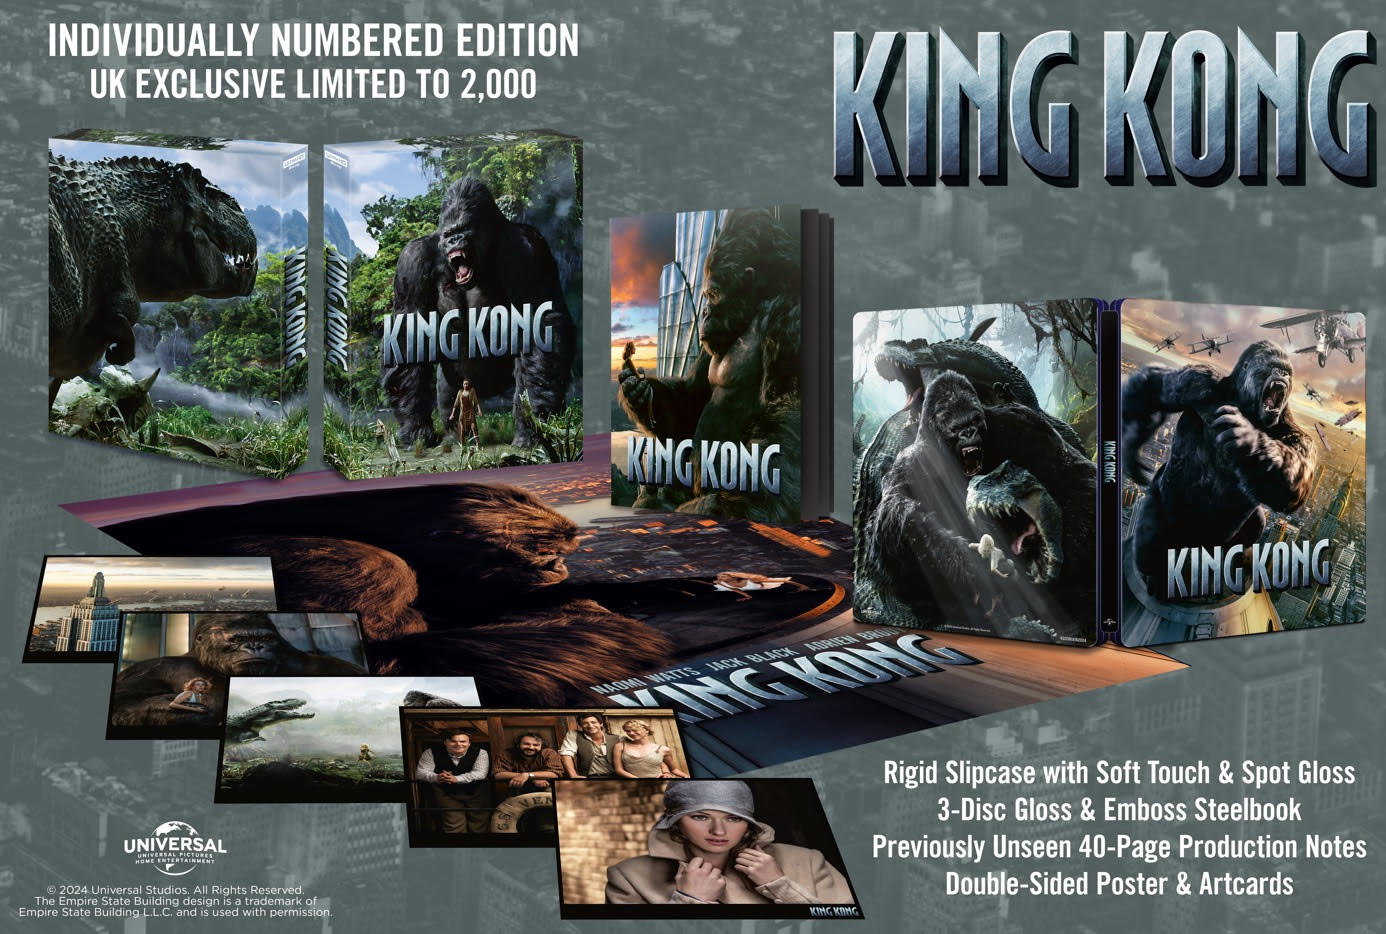 PRE-ORDER King Kong (2005) Limited Ultimate Collector's Edition - 4K UHD